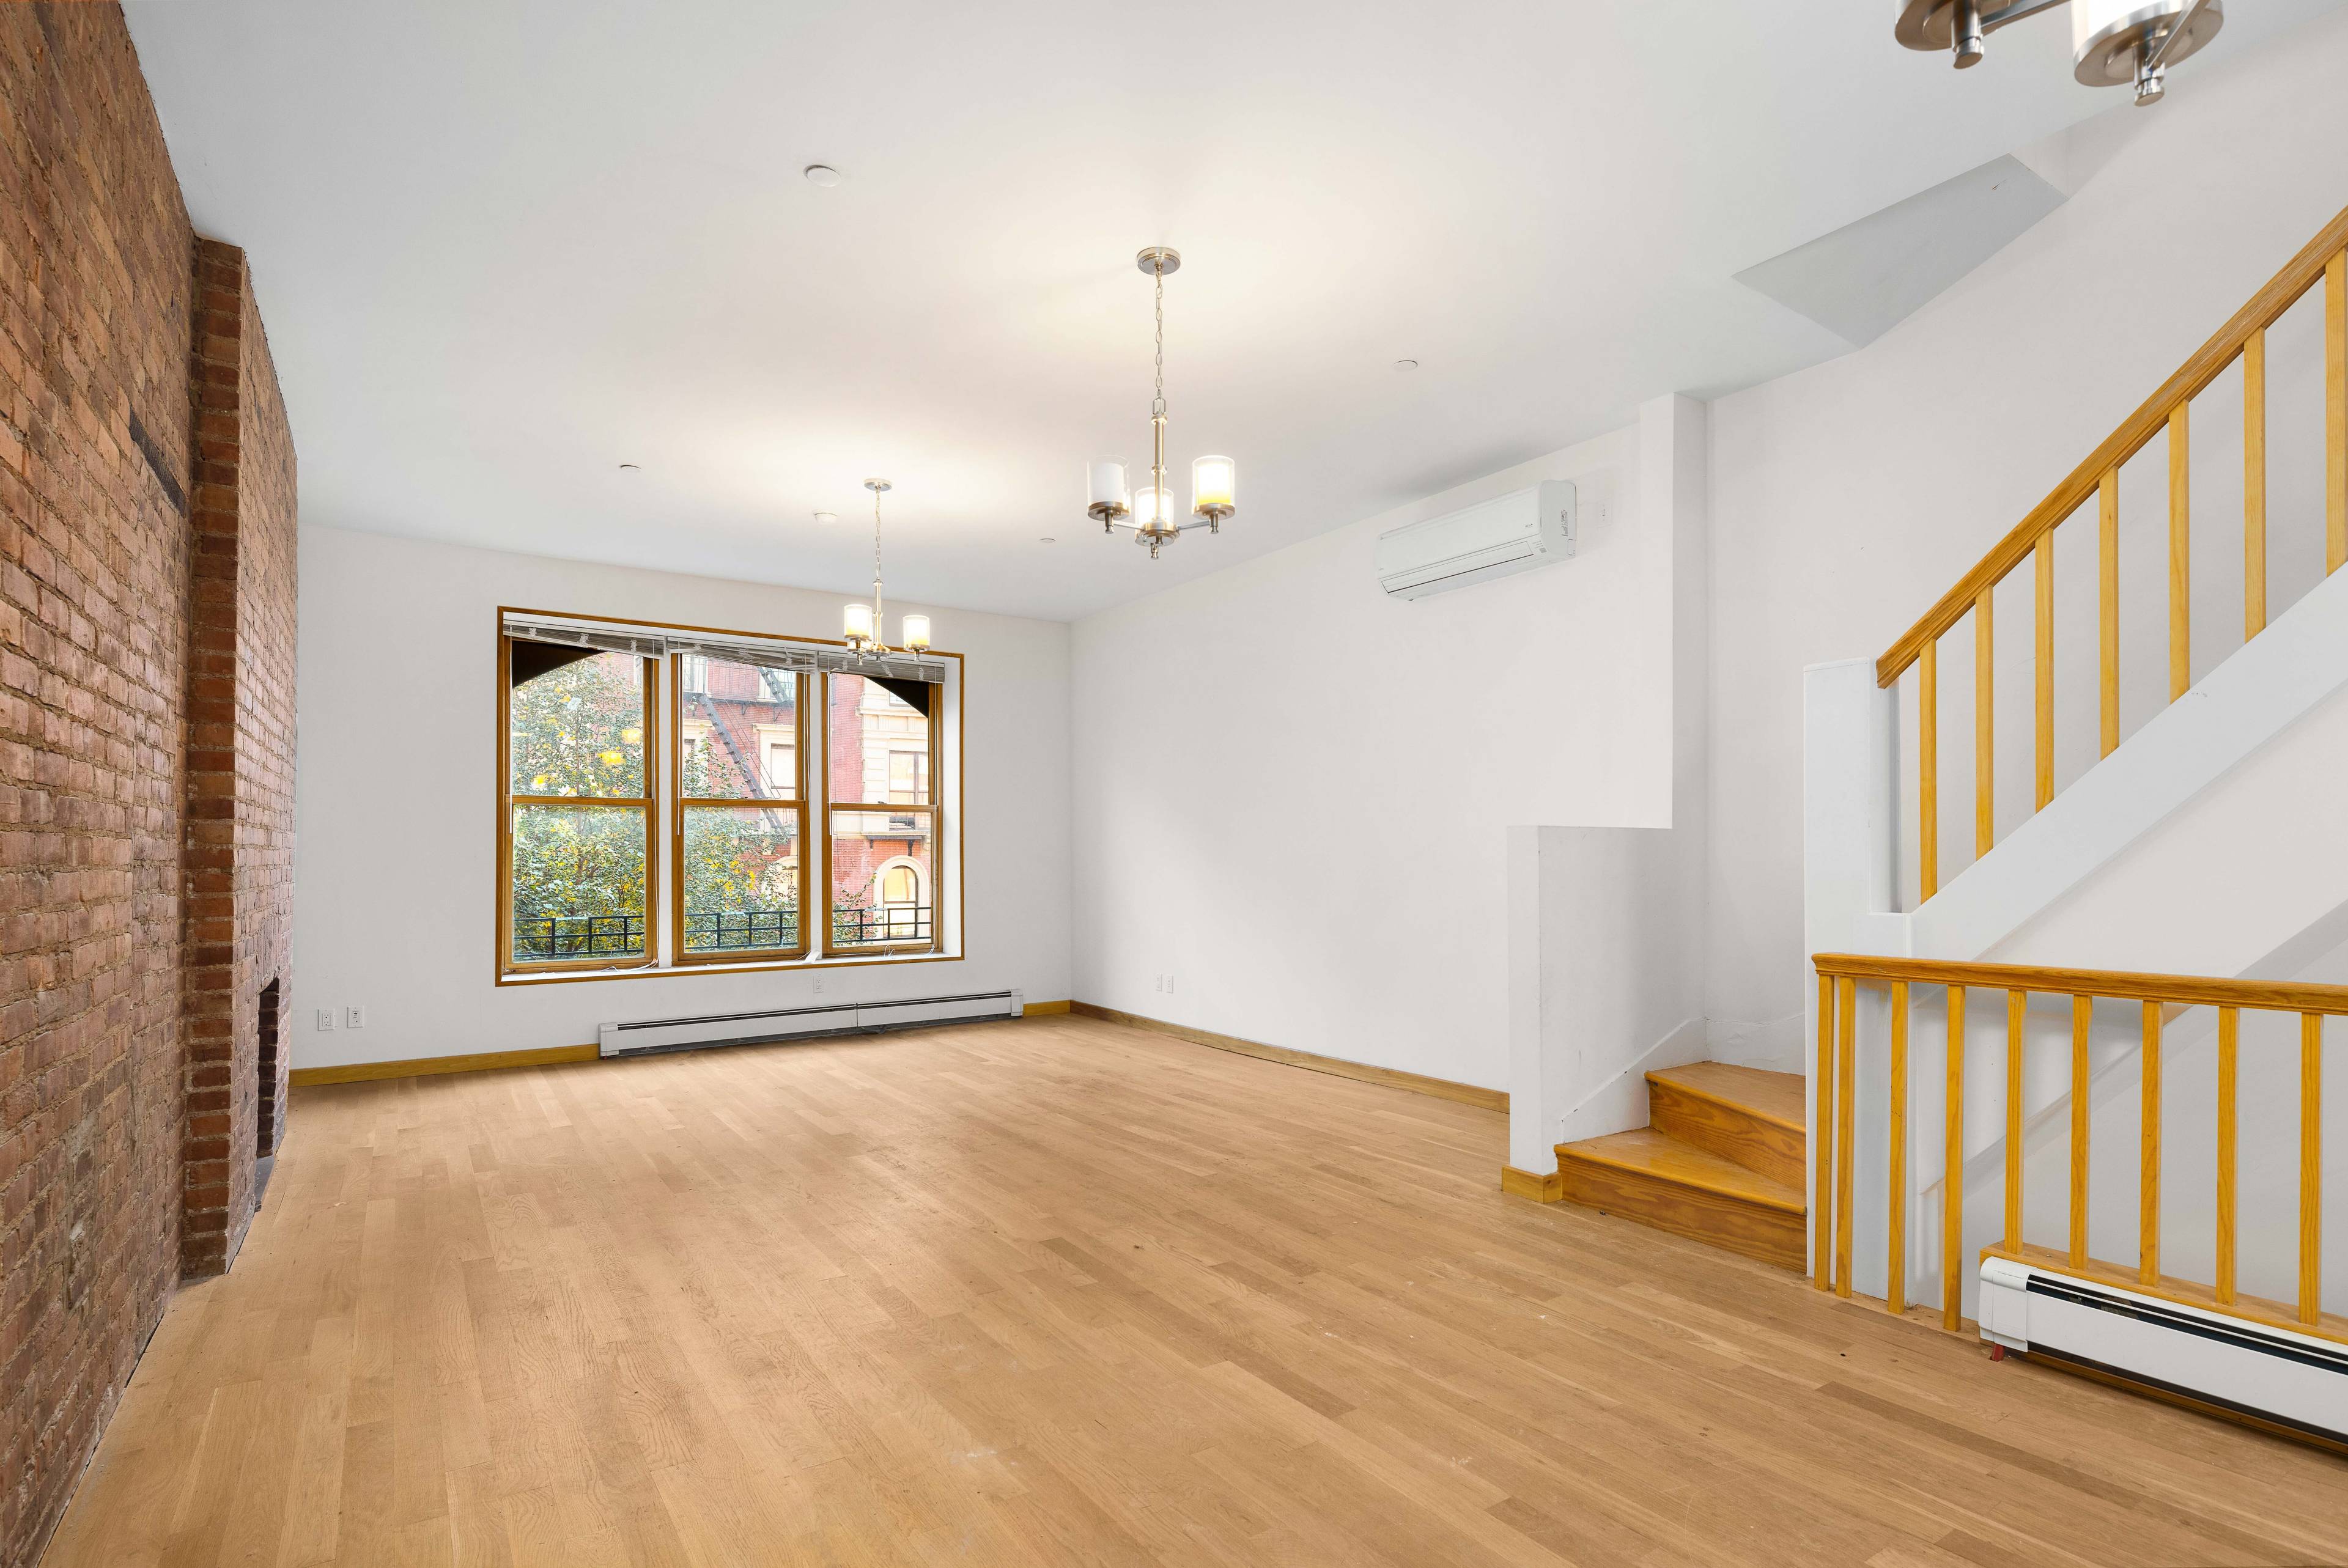 Discover an exceptional opportunity to own a stunning four story brownstone nestled in South Harlem, just moments away from the picturesque Morningside Park.